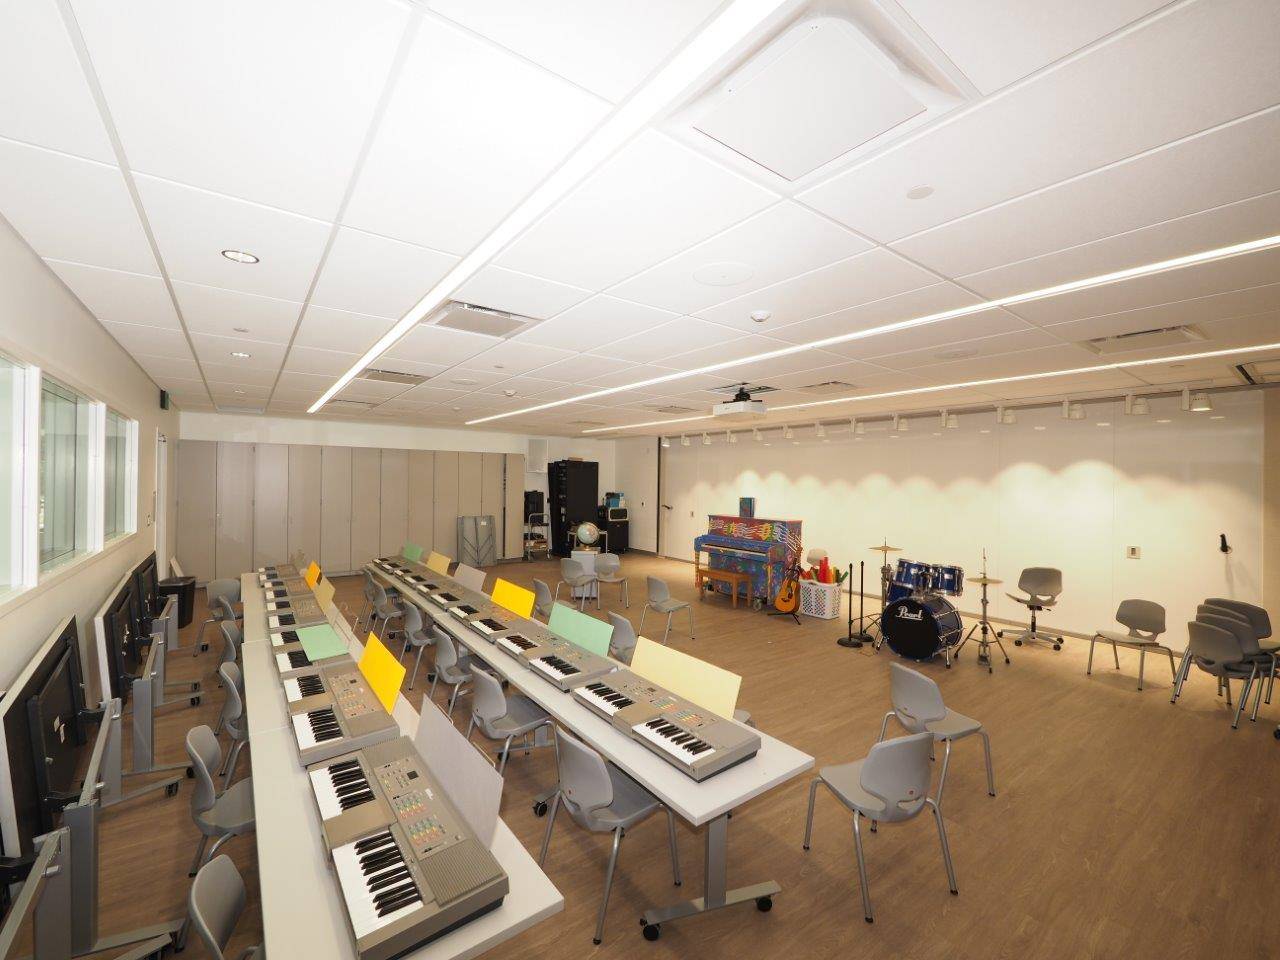 A music room